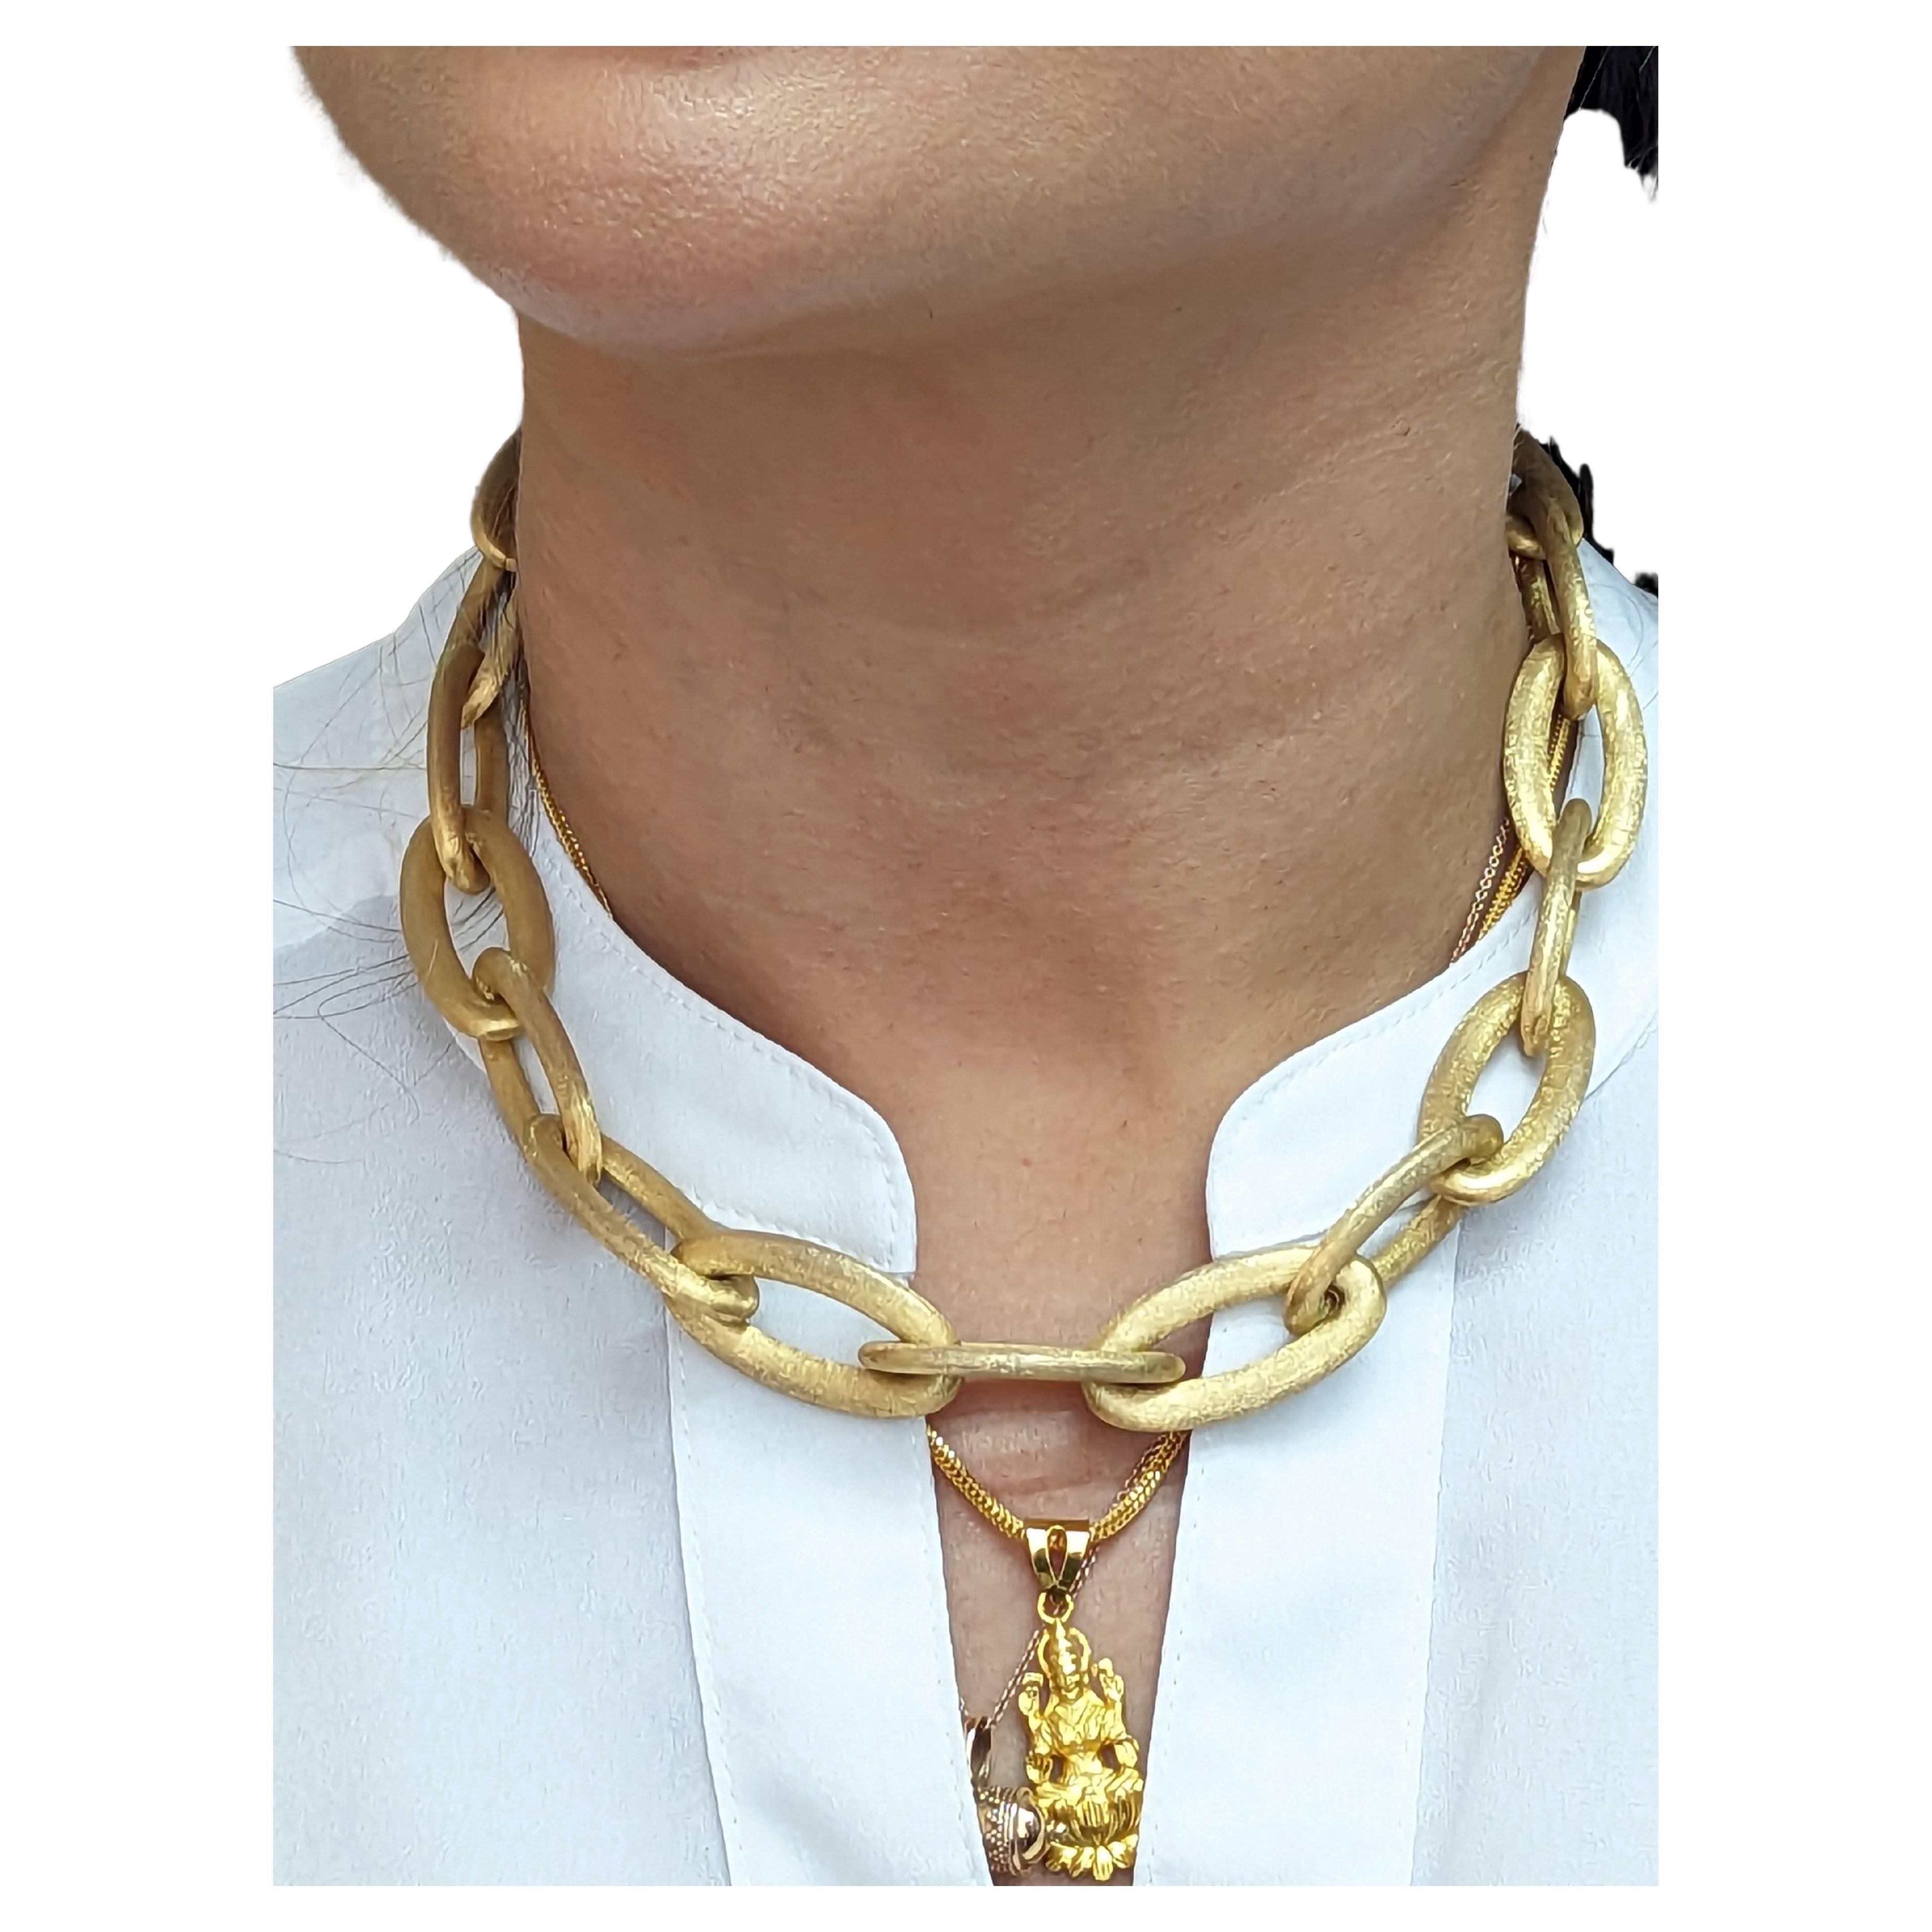 Nachlass NANIS 18KT Italien Gelbgold LINK LIBERA ICON NECKLACE